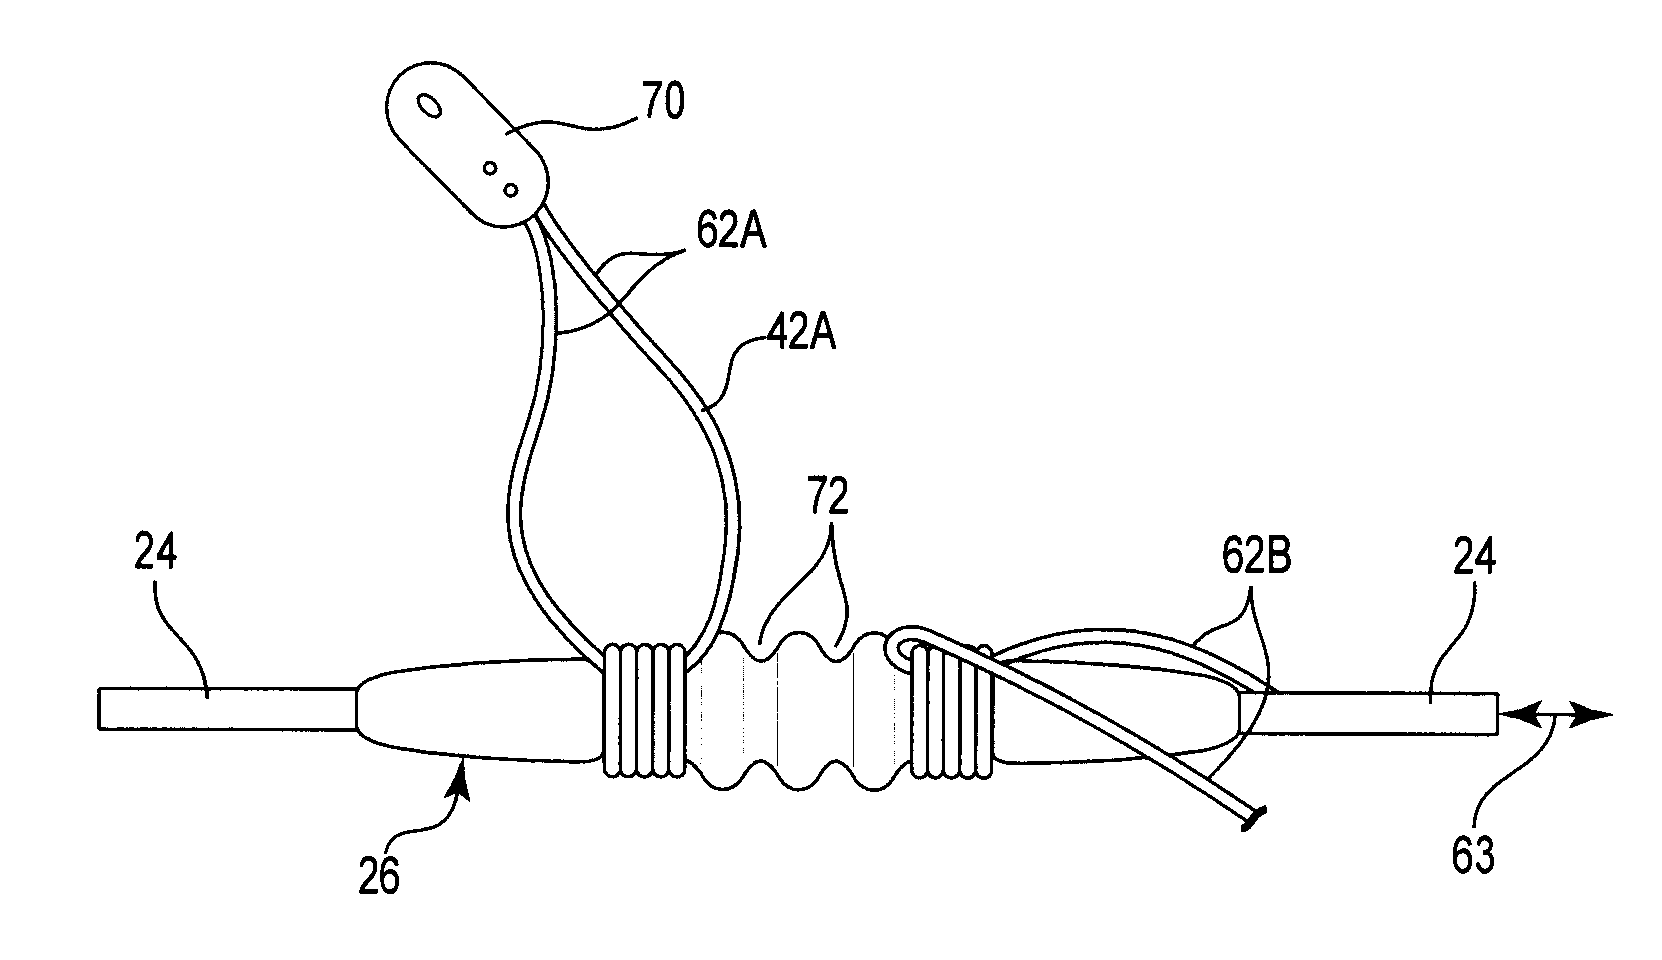 Pre-sutured anchor for implantable leads